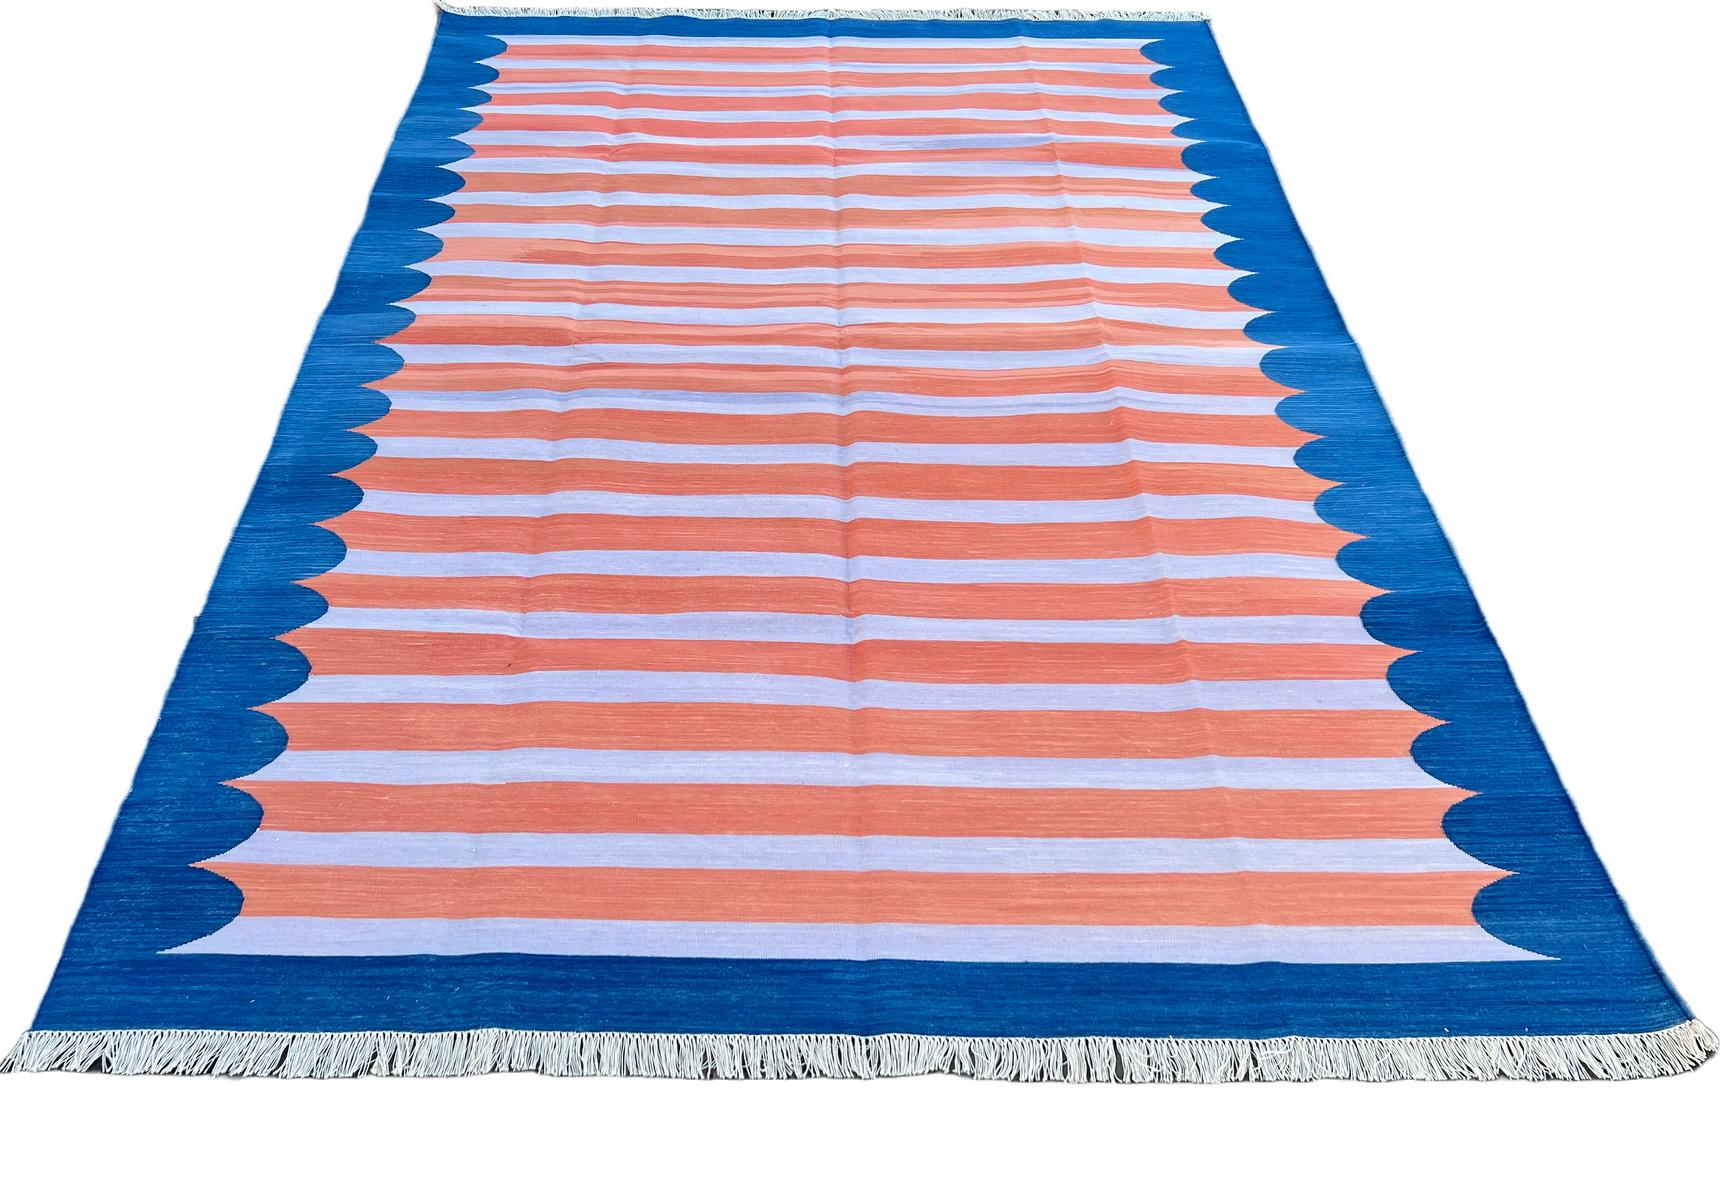 Handmade Cotton Area Flat Weave Rug, 6x9 Coral And Blue Striped Indian Dhurrie In New Condition For Sale In Jaipur, IN